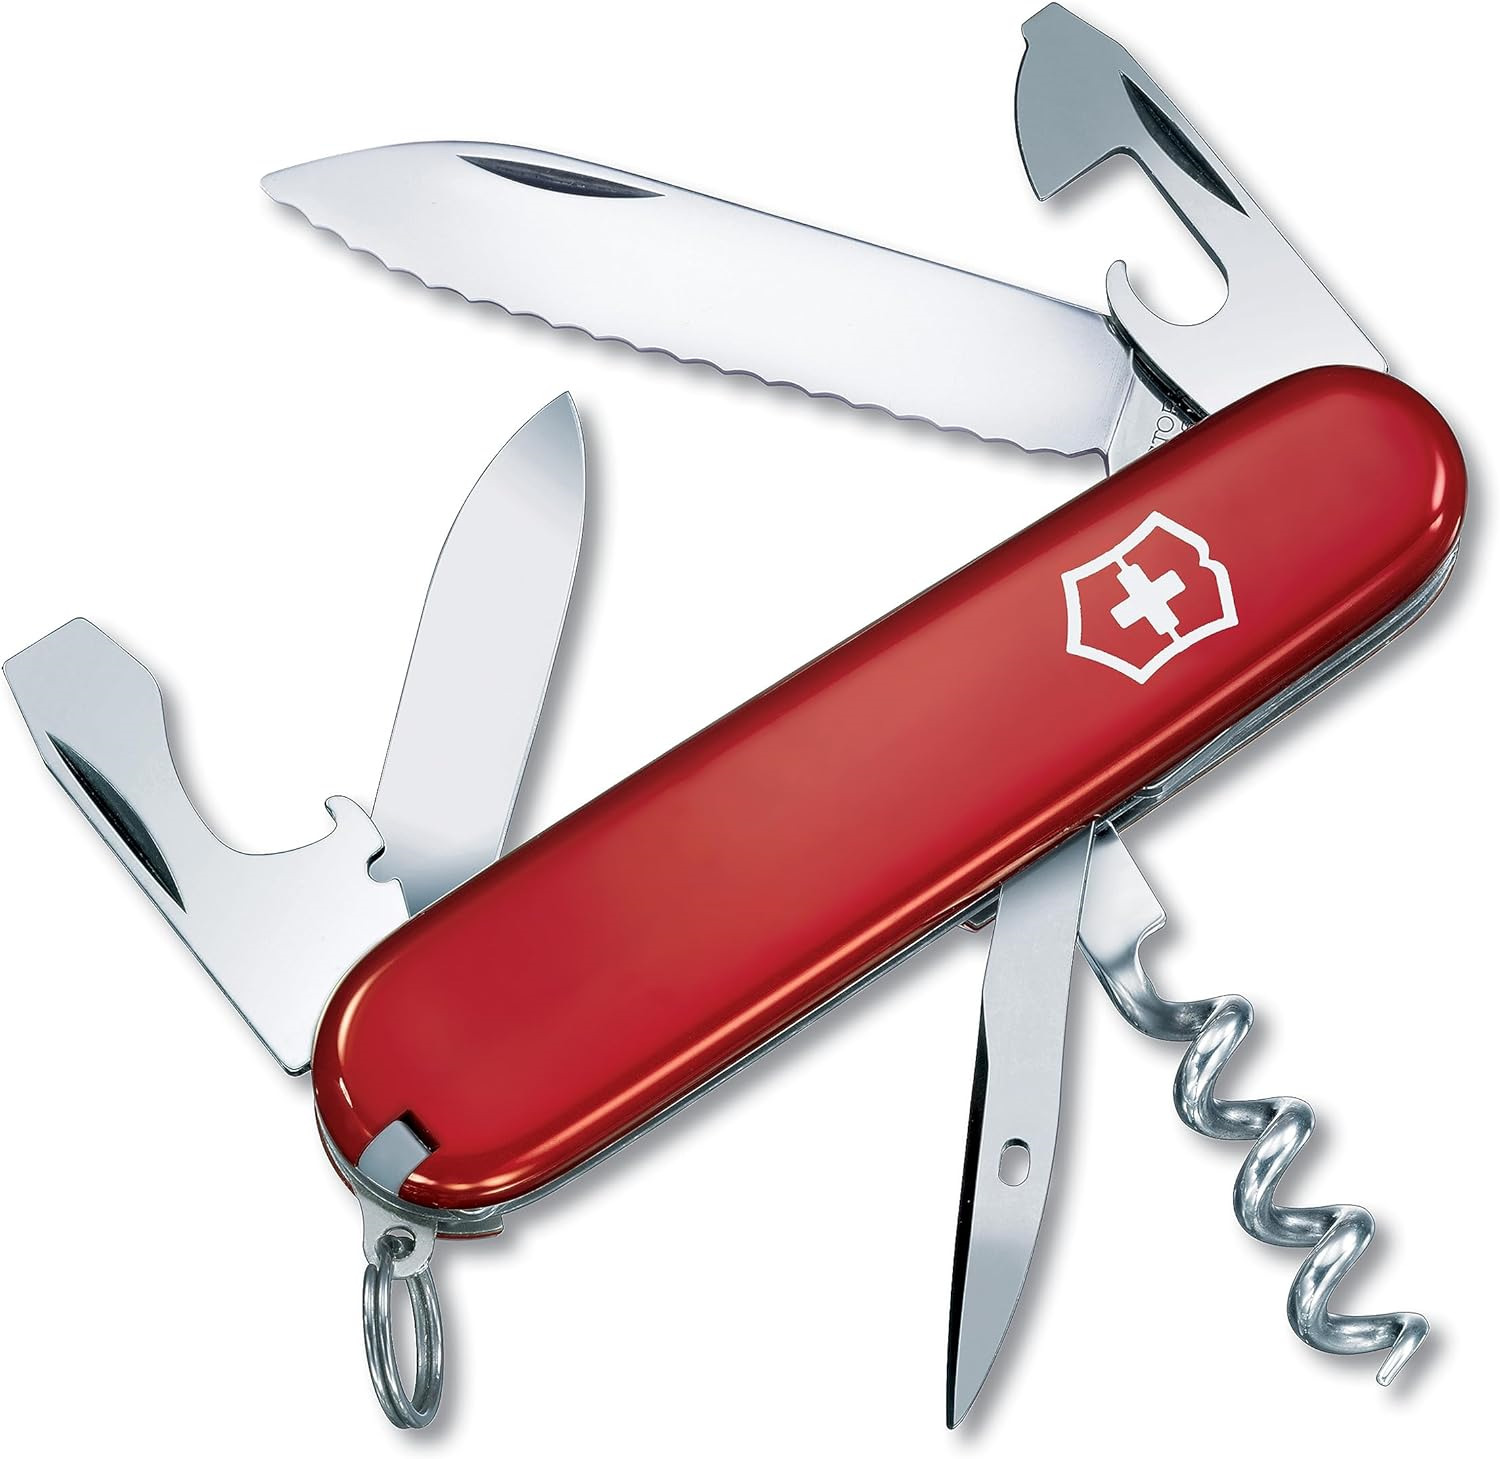 Victorinox Spartan Serrated 12 Function Swiss Army Knife - Red